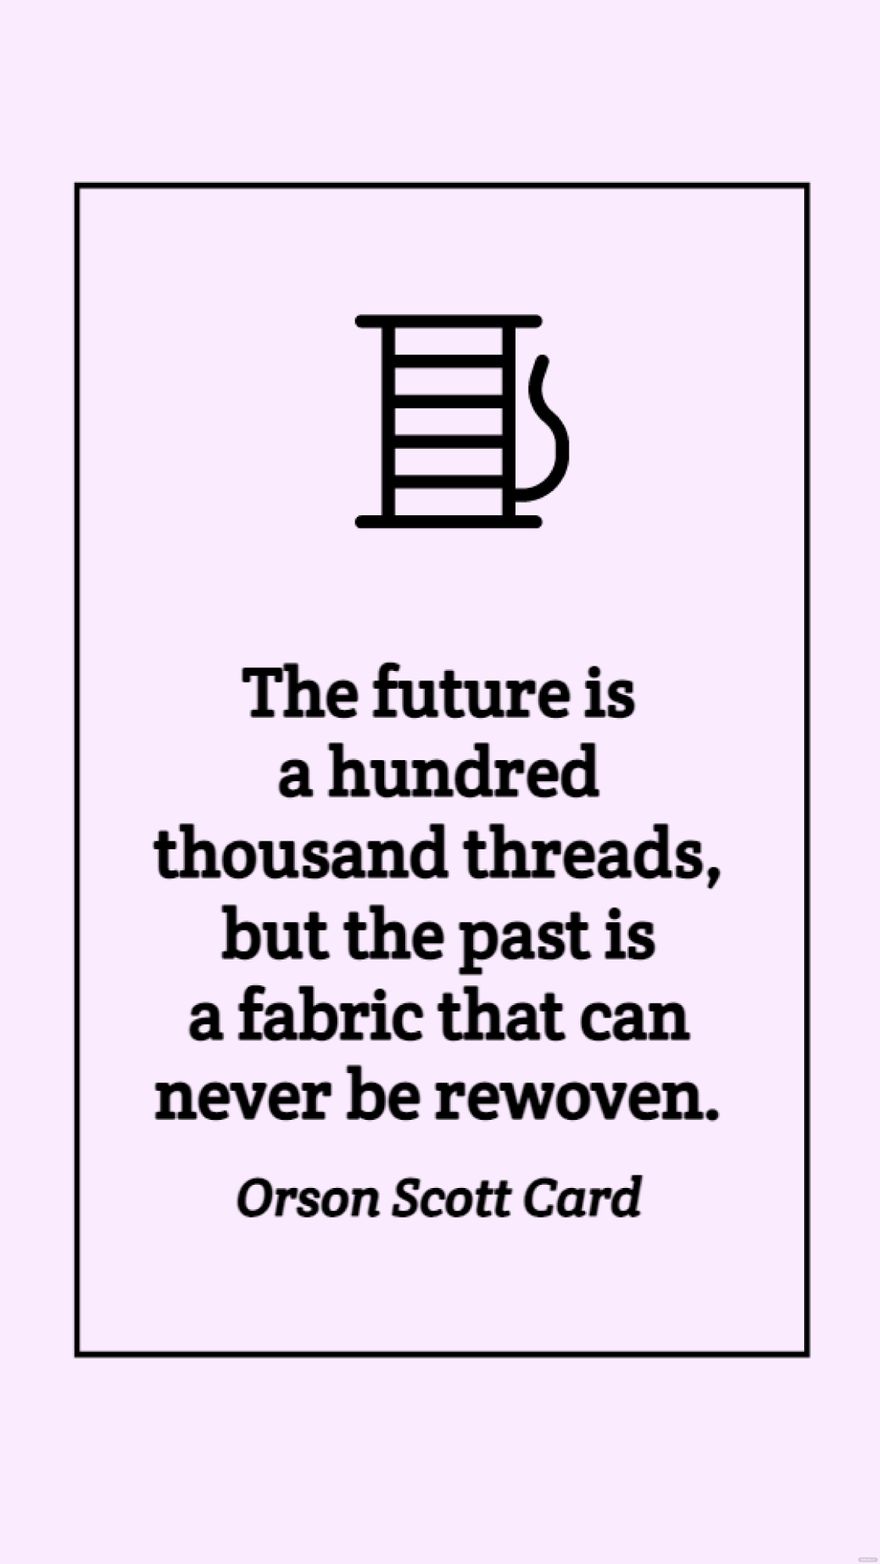 Free Orson Scott Card - The future is a hundred thousand threads, but the past is a fabric that can never be rewoven. in JPG